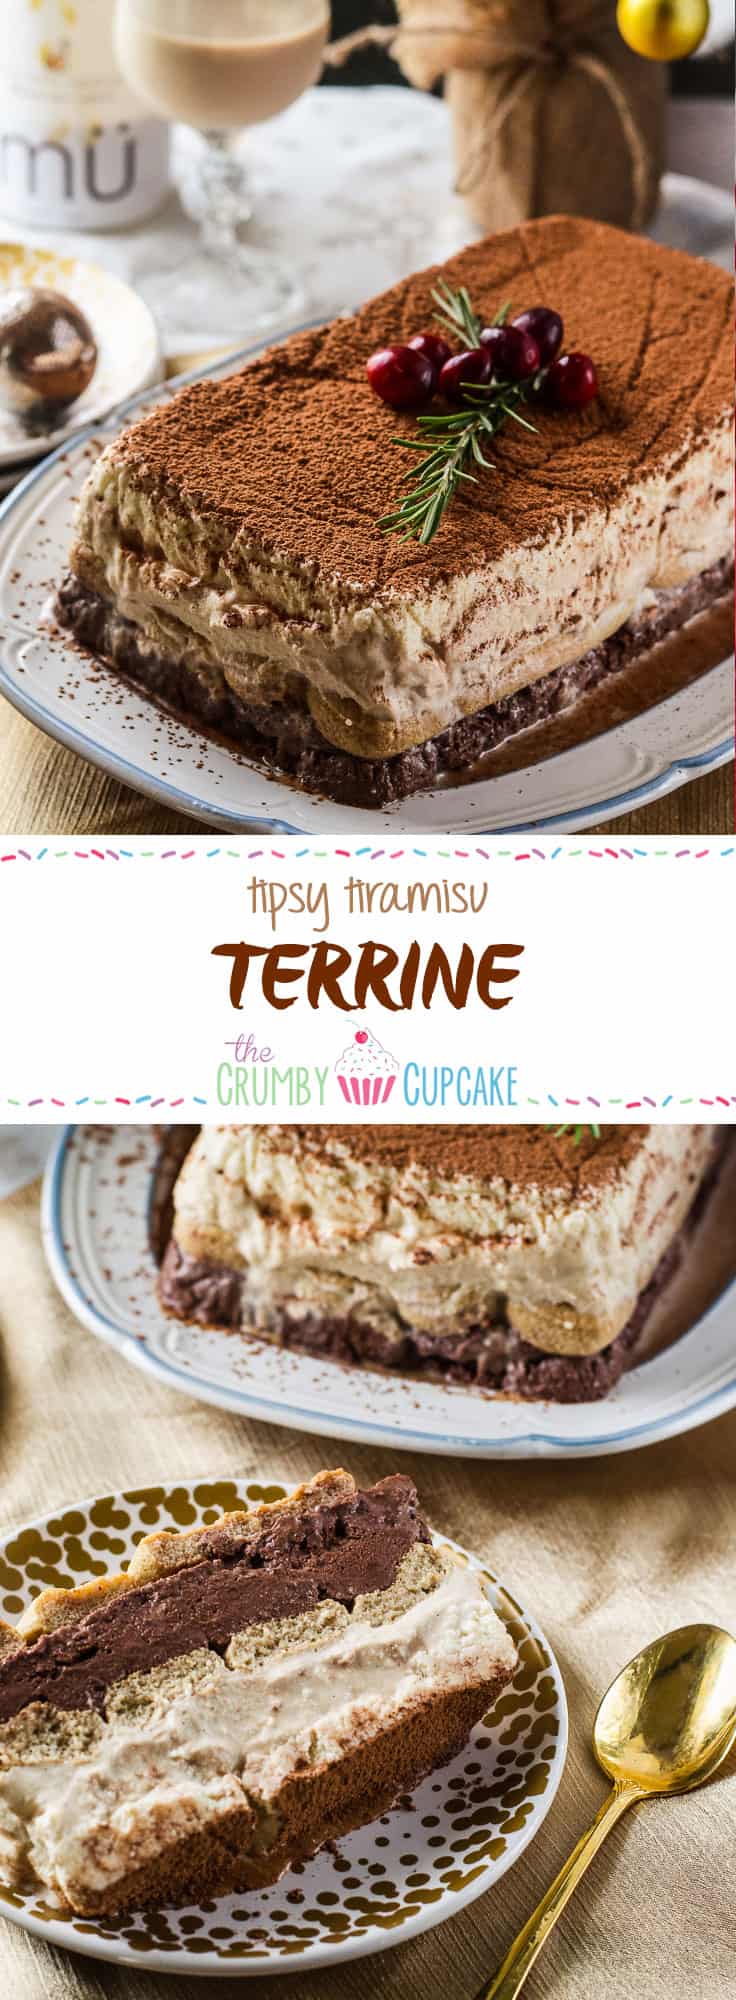 A cocktail-enhanced twist on classic tiramisu - coffee, dark chocolate, and white chocolate mousses, layered with espresso and mü-soaked ladyfingers. It's the ultimate grown-up dessert!